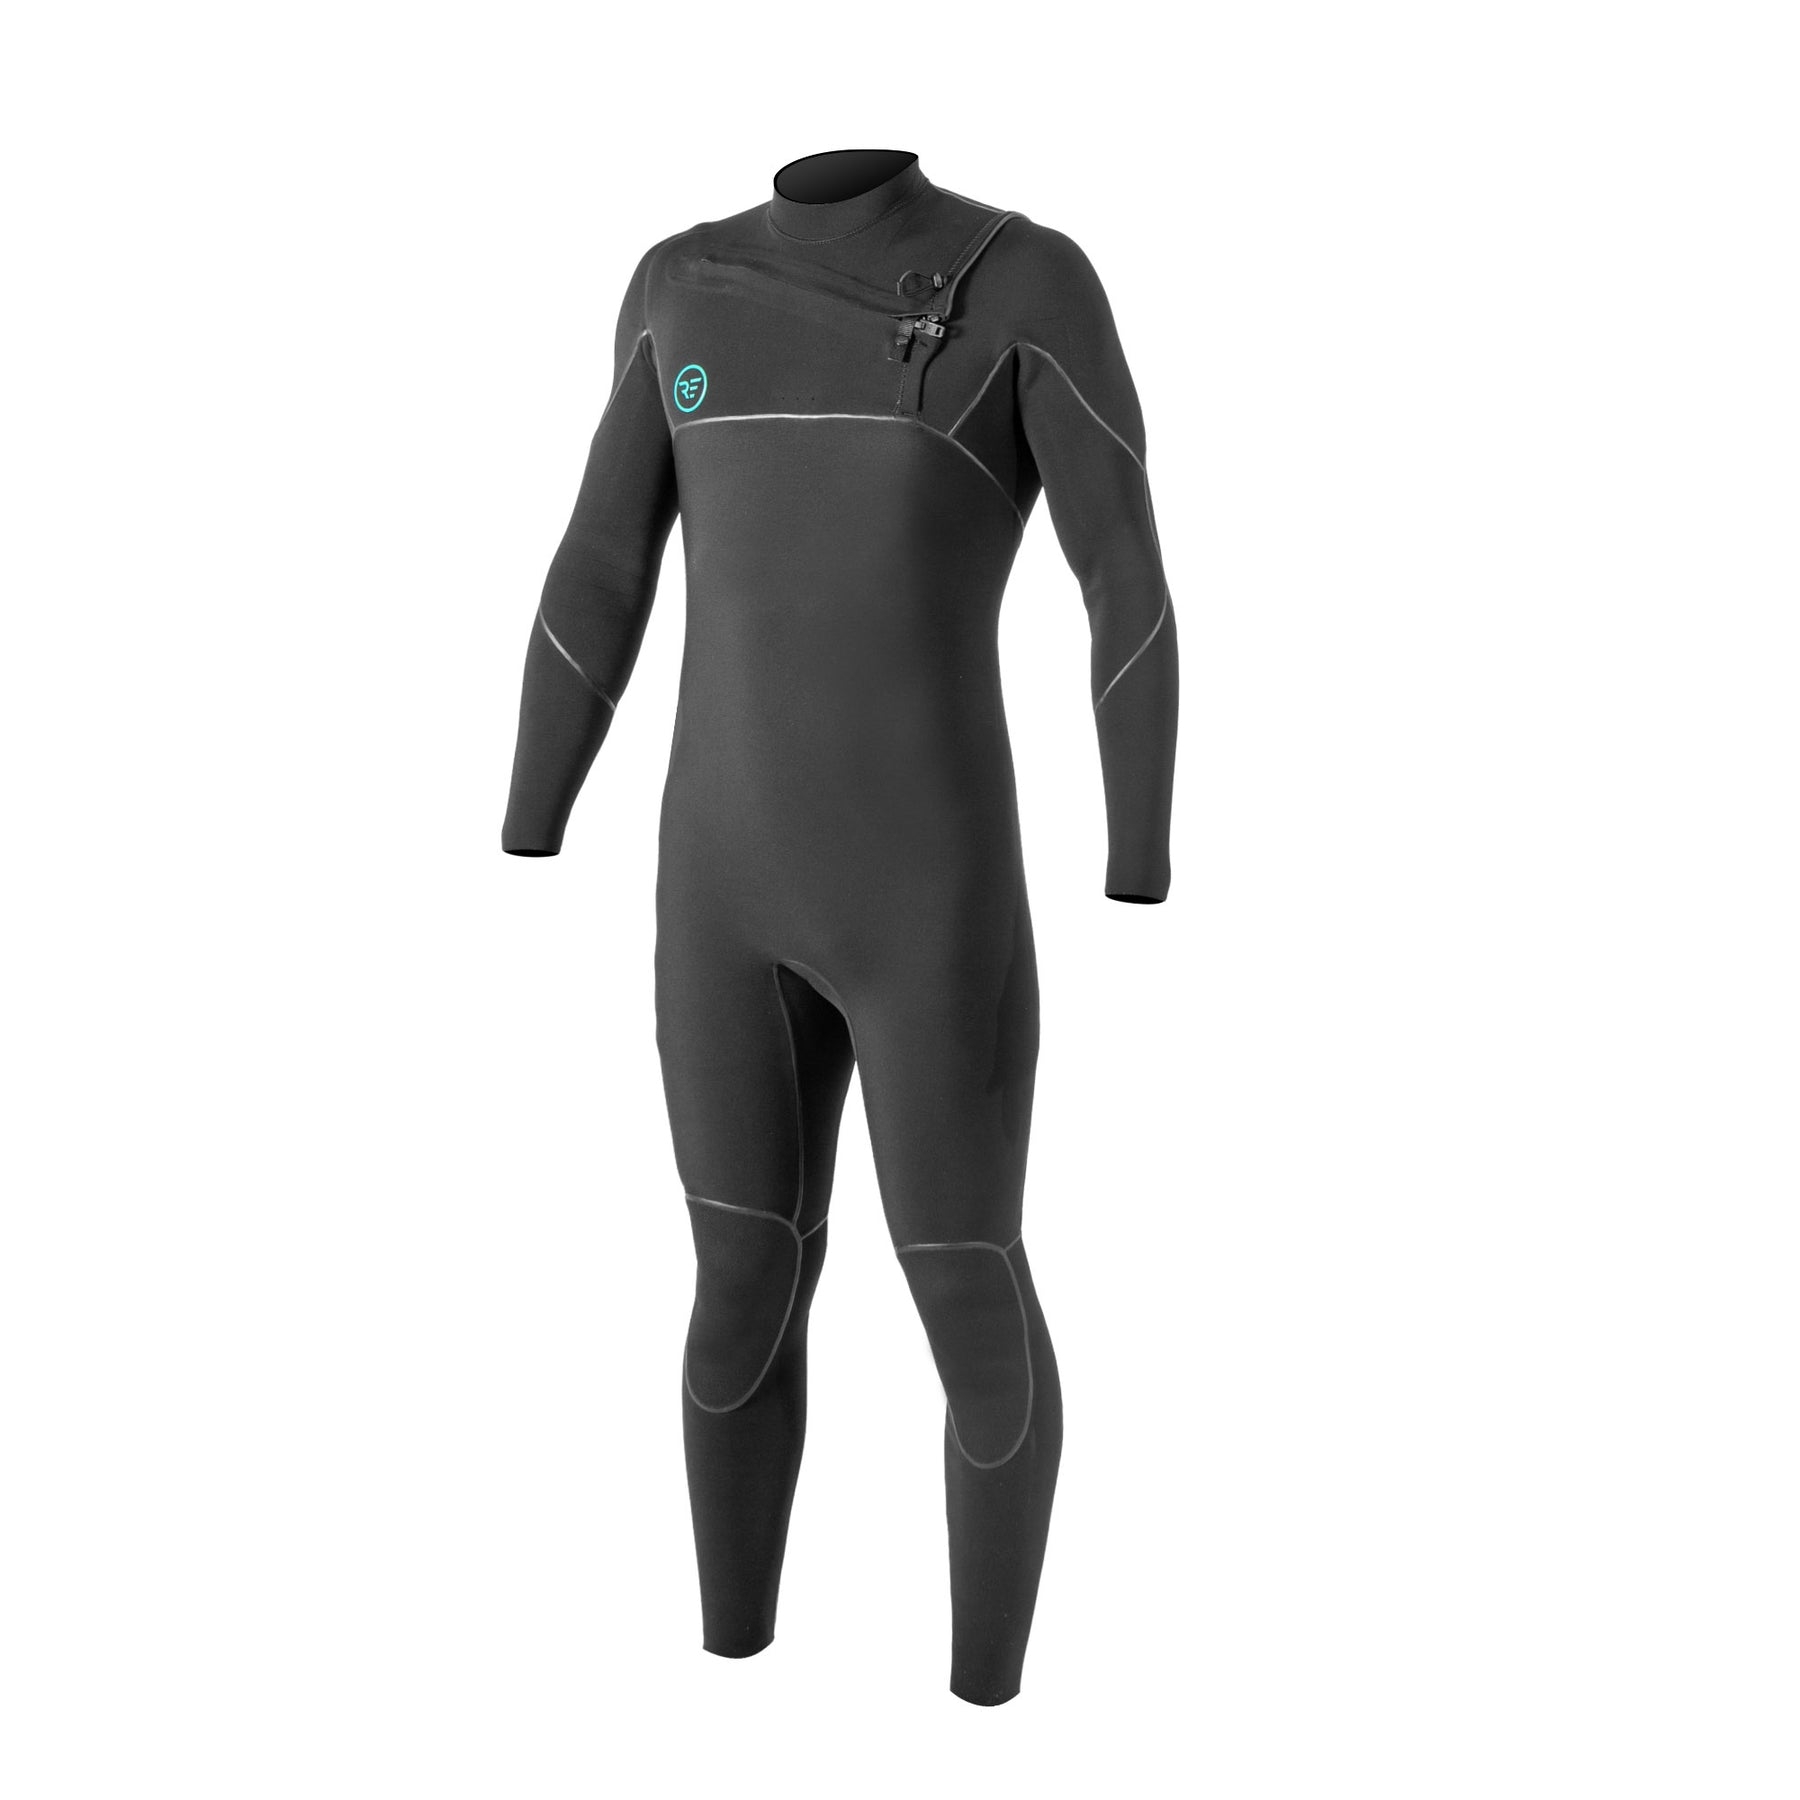 Ride Engine Apoc 3/2 FZ Wetsuit – XL – The Foiling Collective